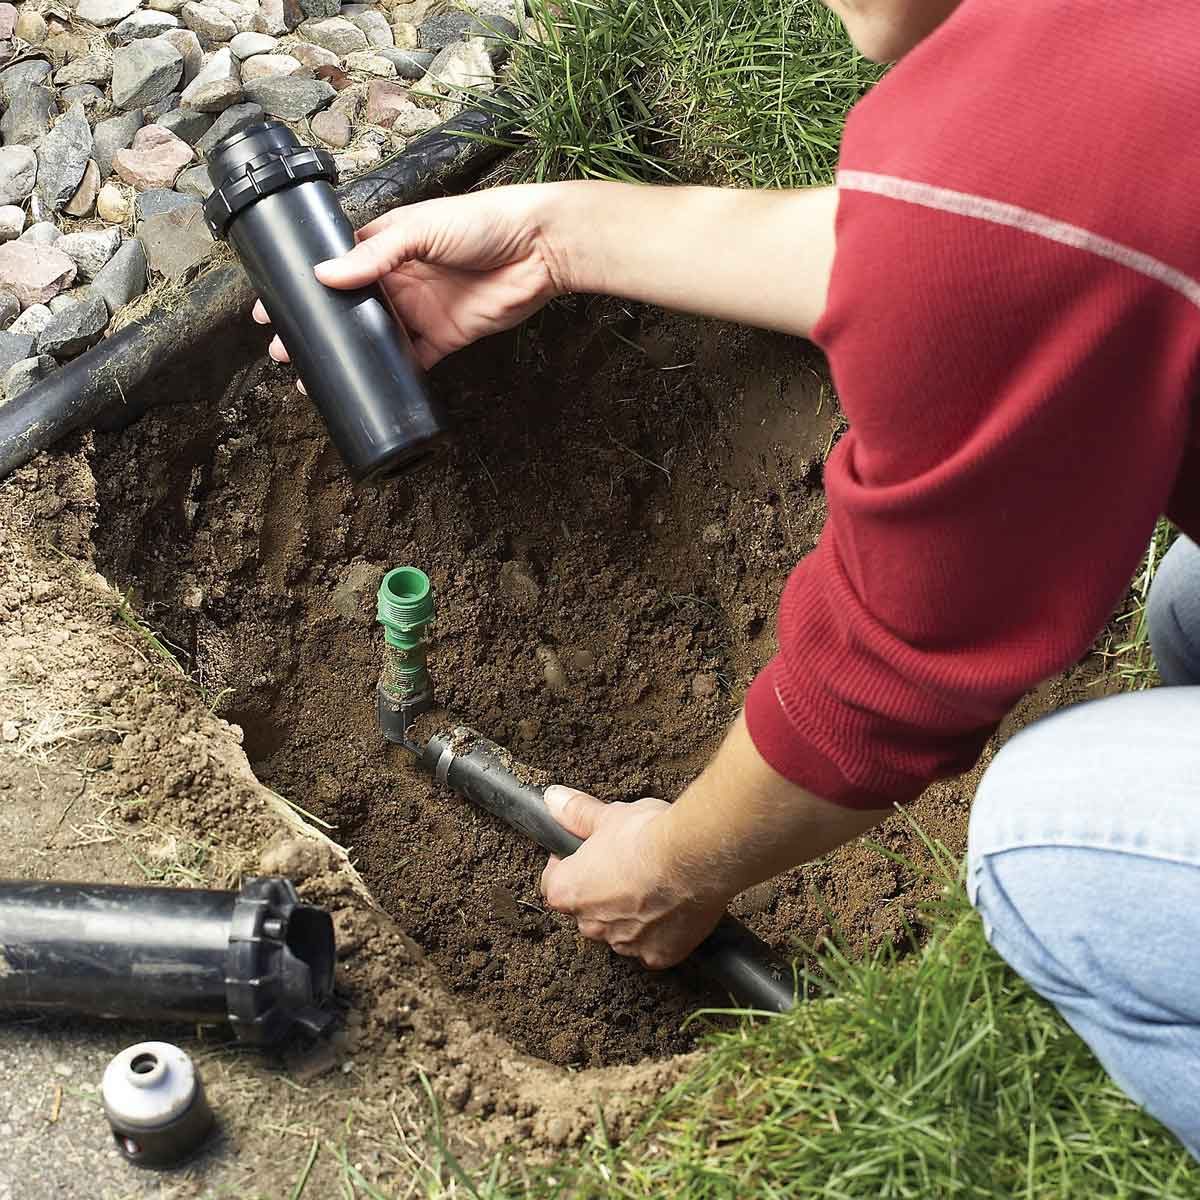 How to Flush and Install a New Sprinkler Nozzle